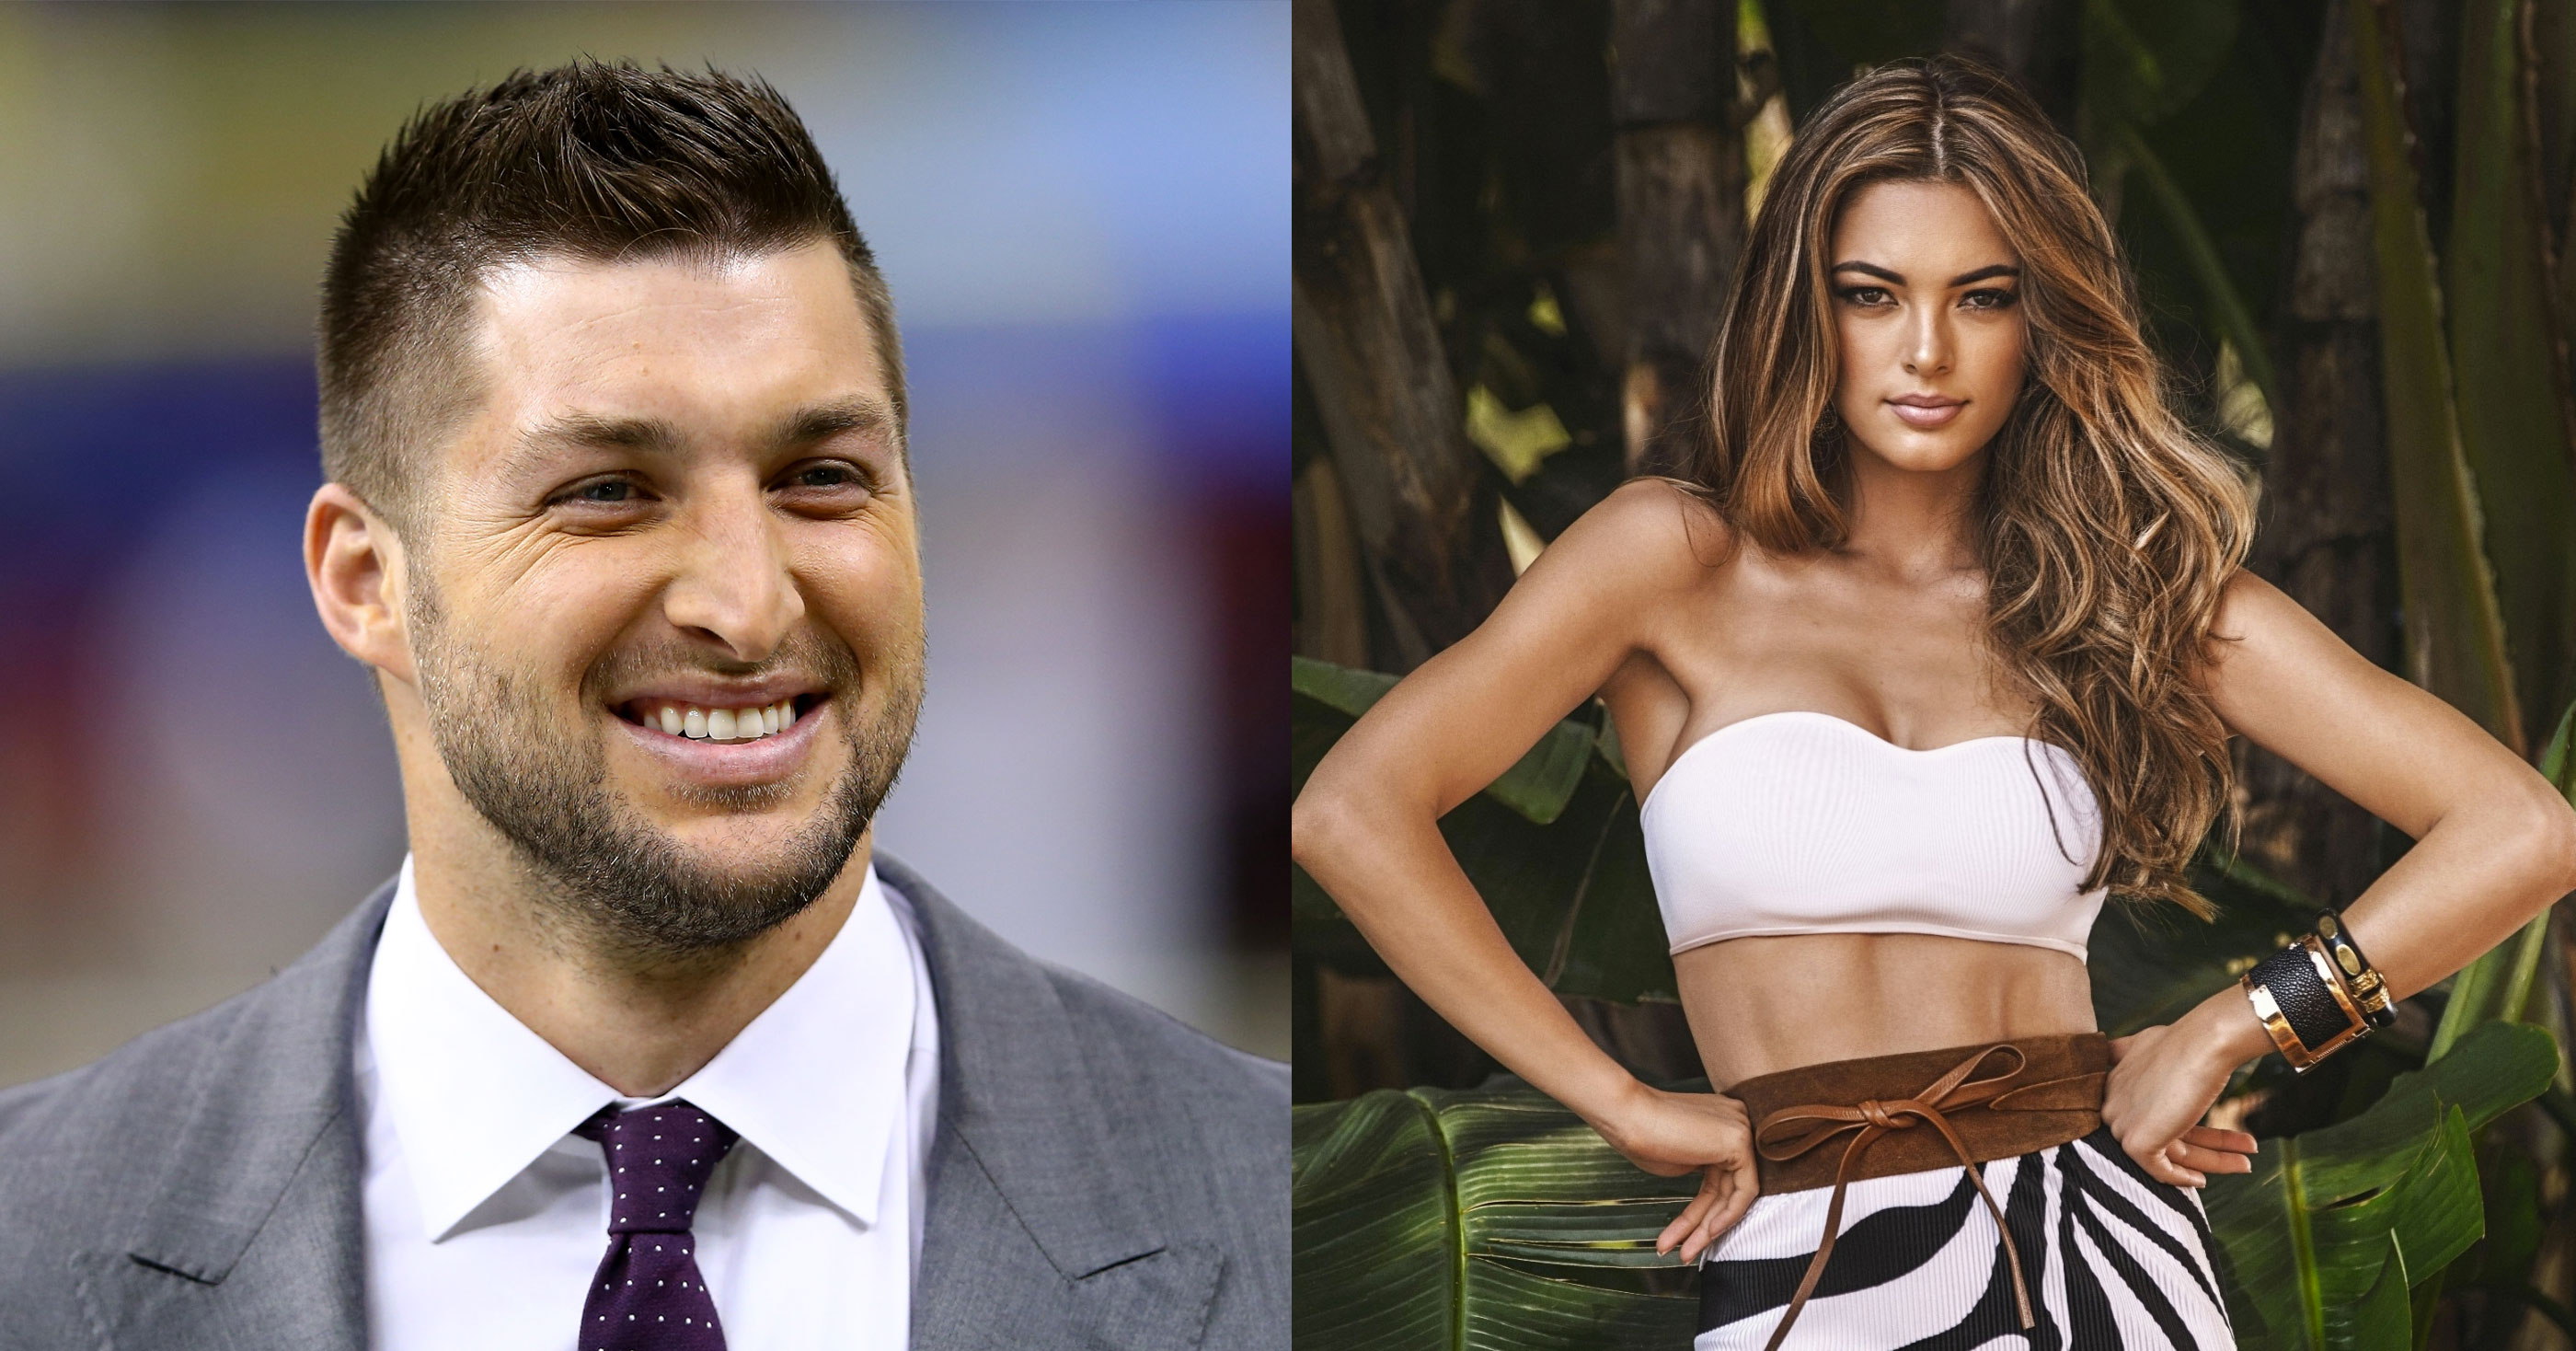 Tim Tebow Gets Engaged To Miss Universe Demi-Leigh Nel-Peters (PICS)2800 x 1468